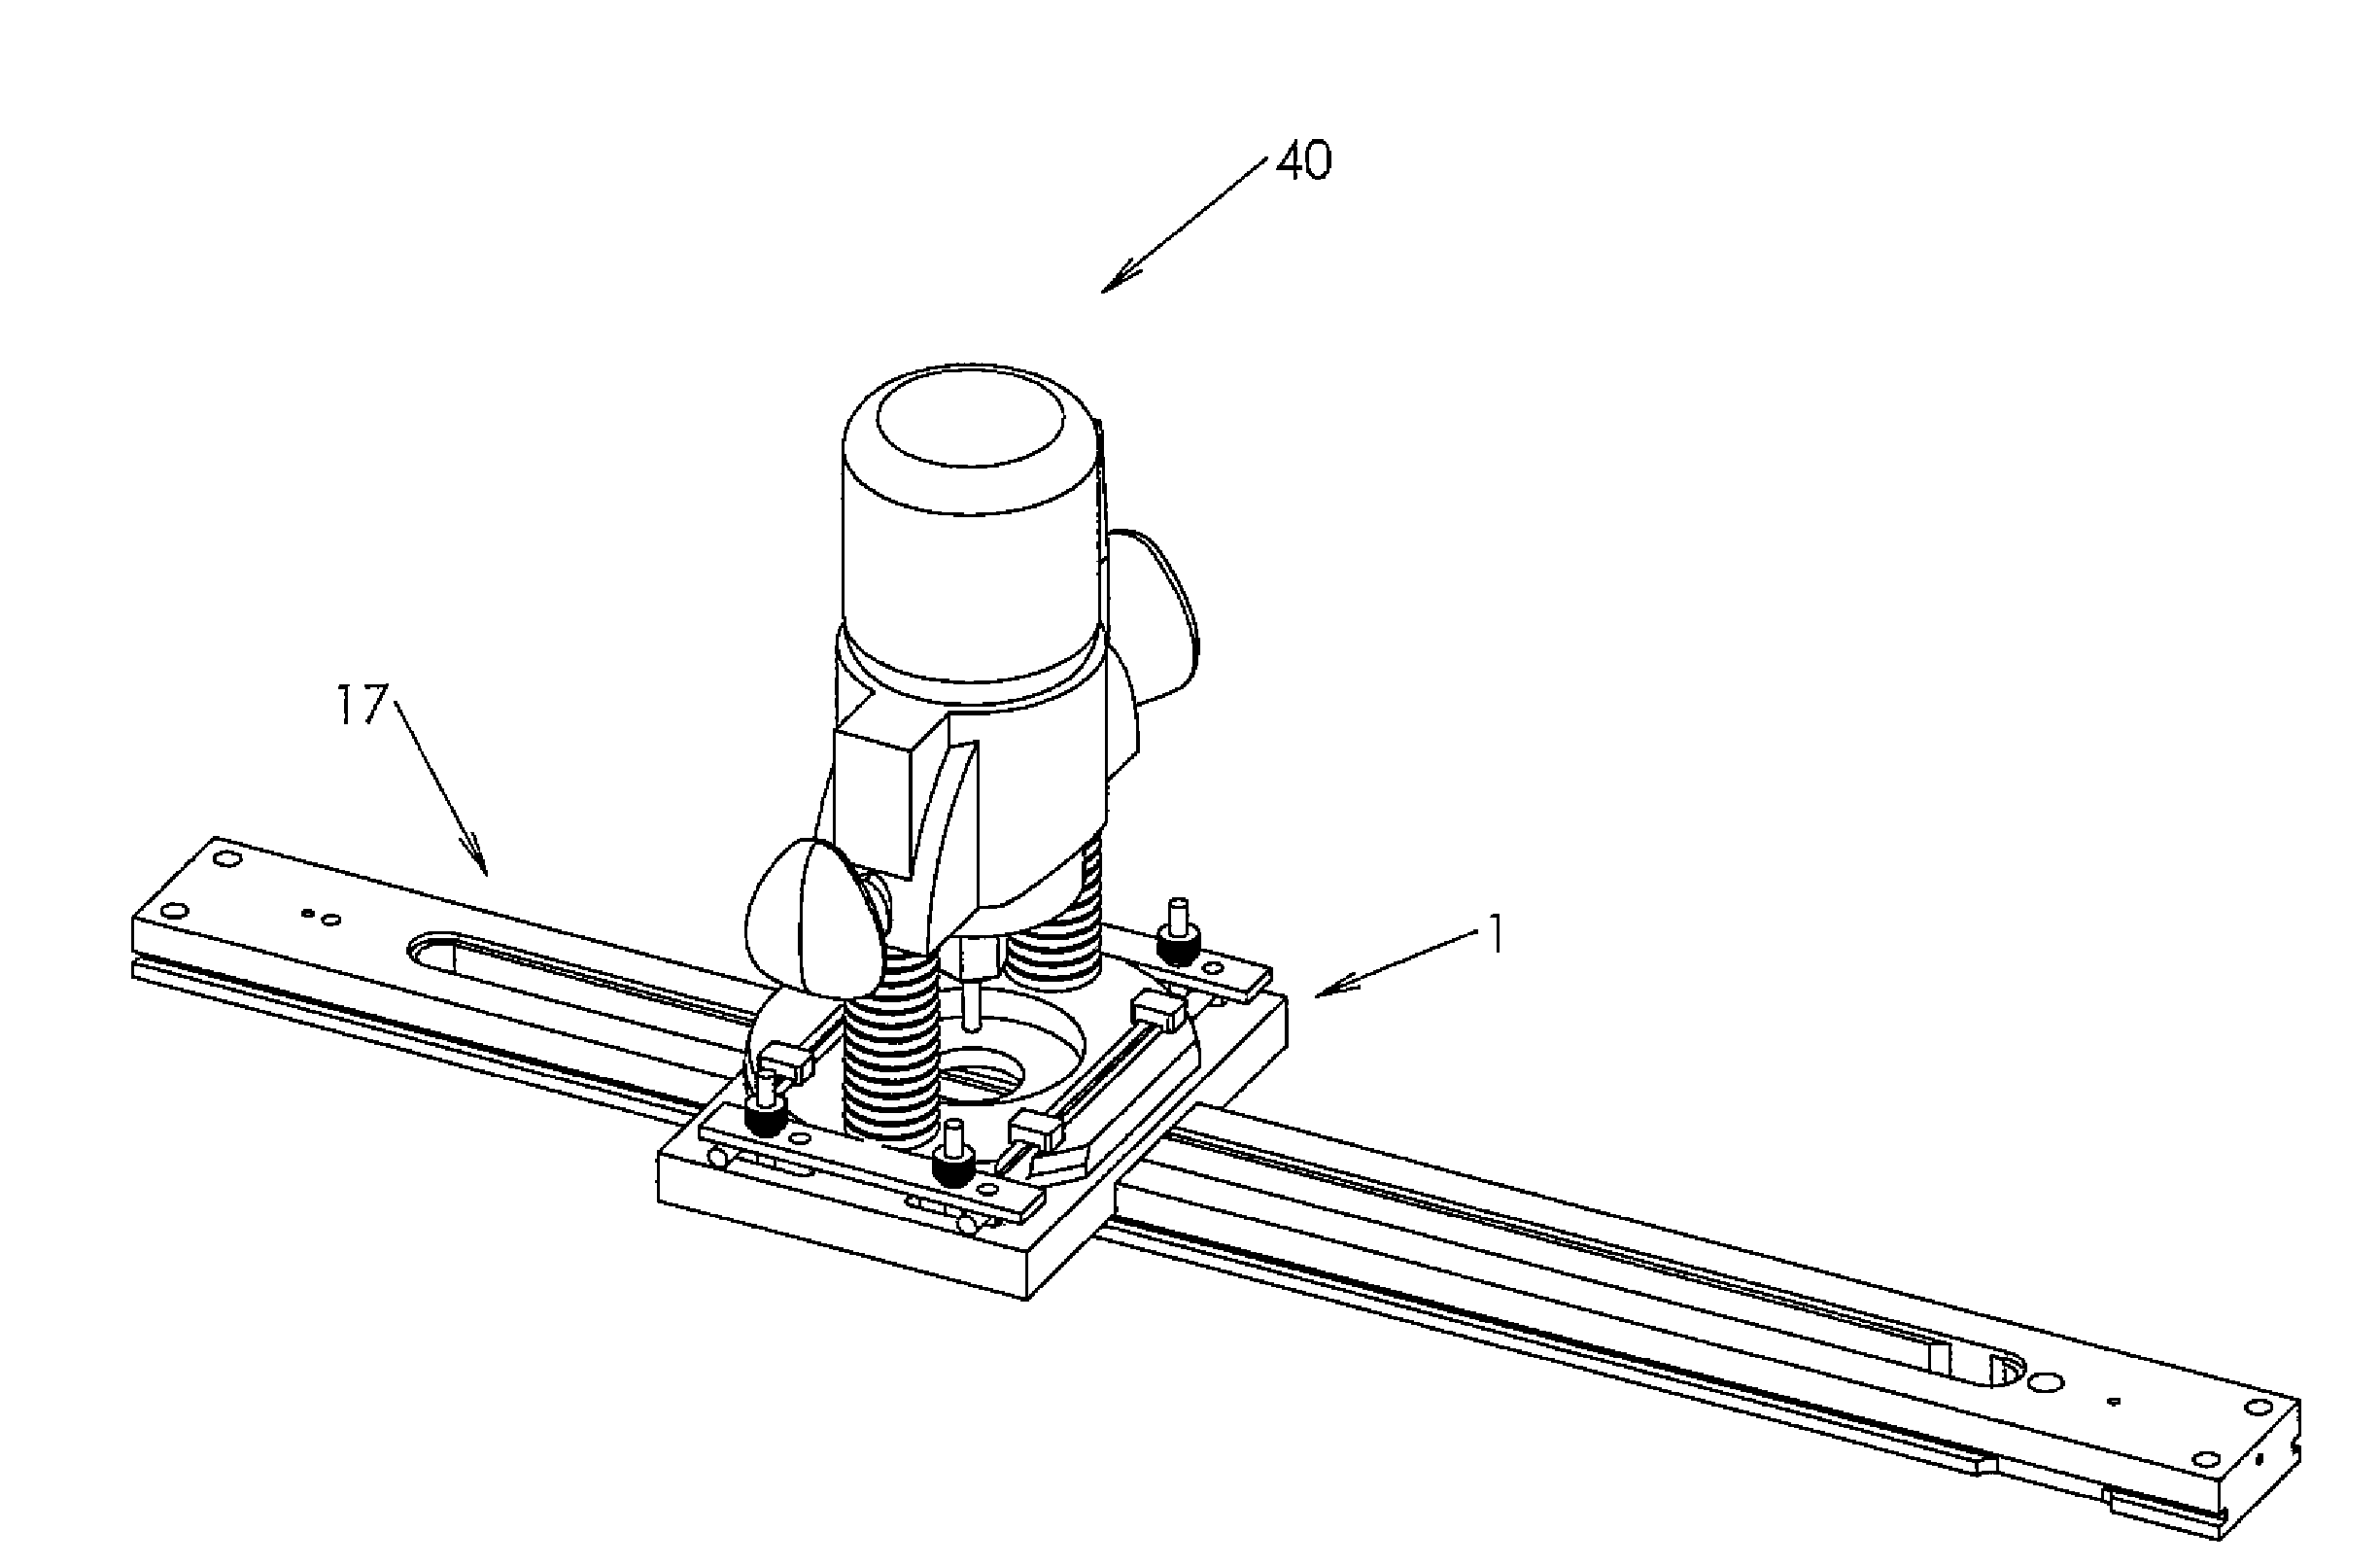 Apparatus for facilitating work on stringed instruments